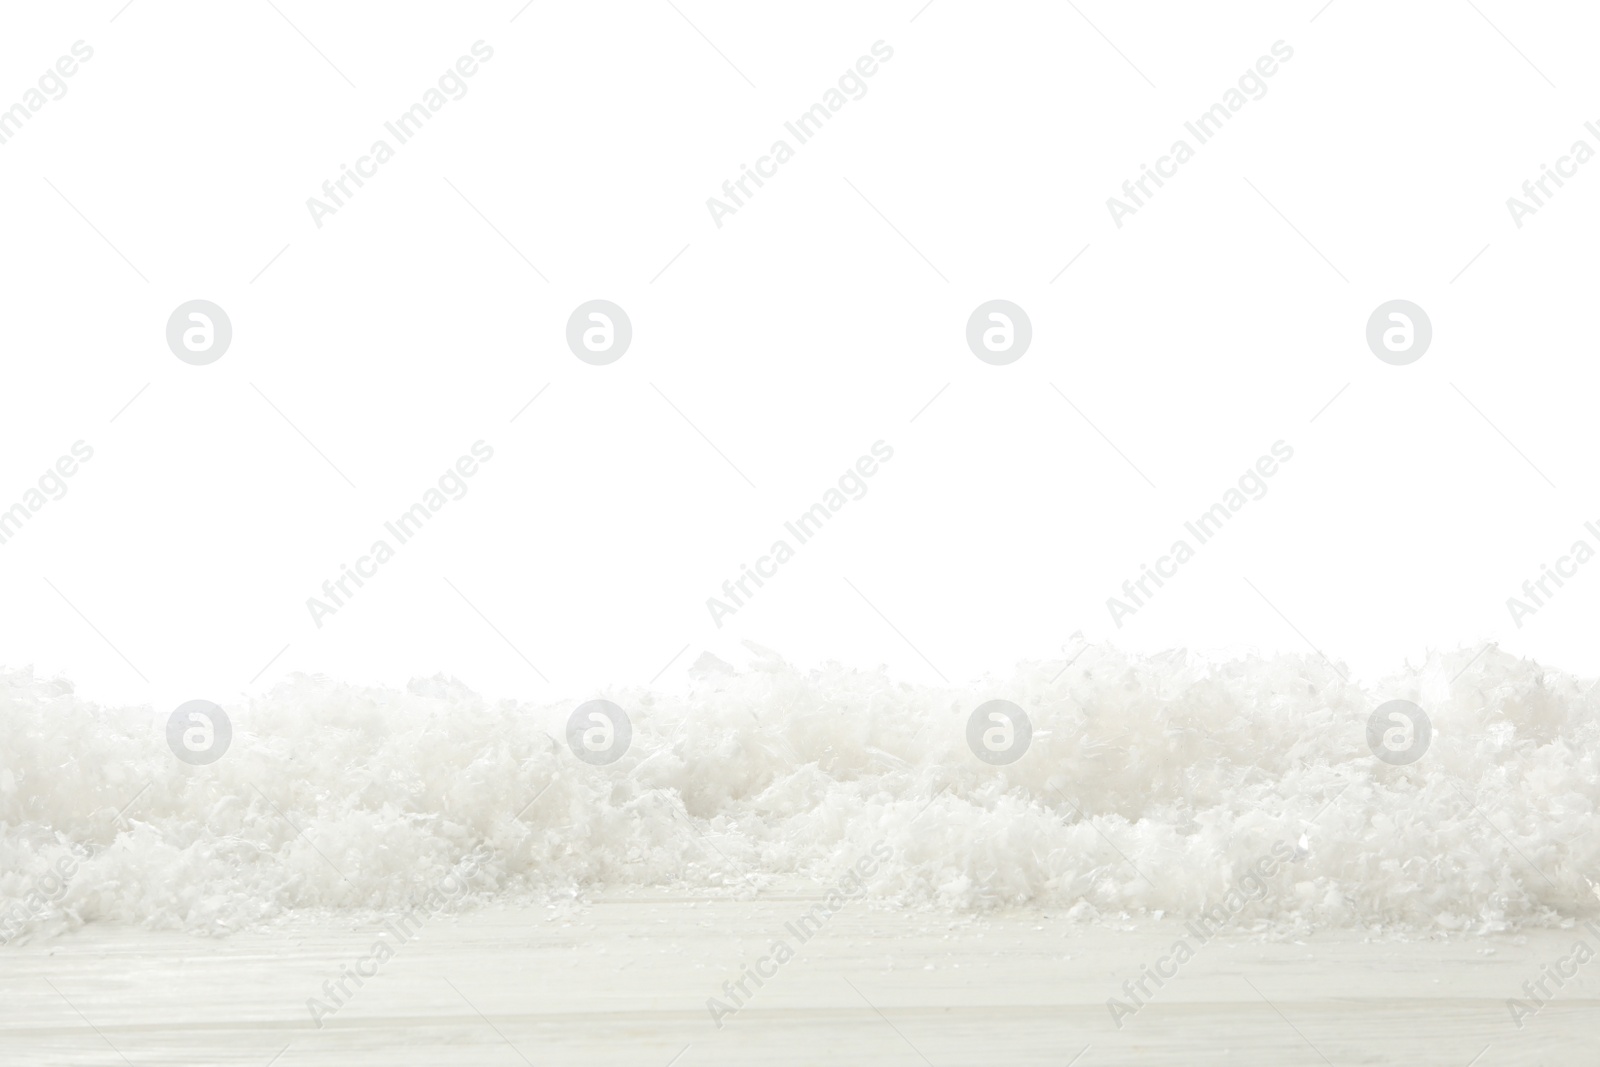 Photo of Snow on wooden surface against white background. Christmas season